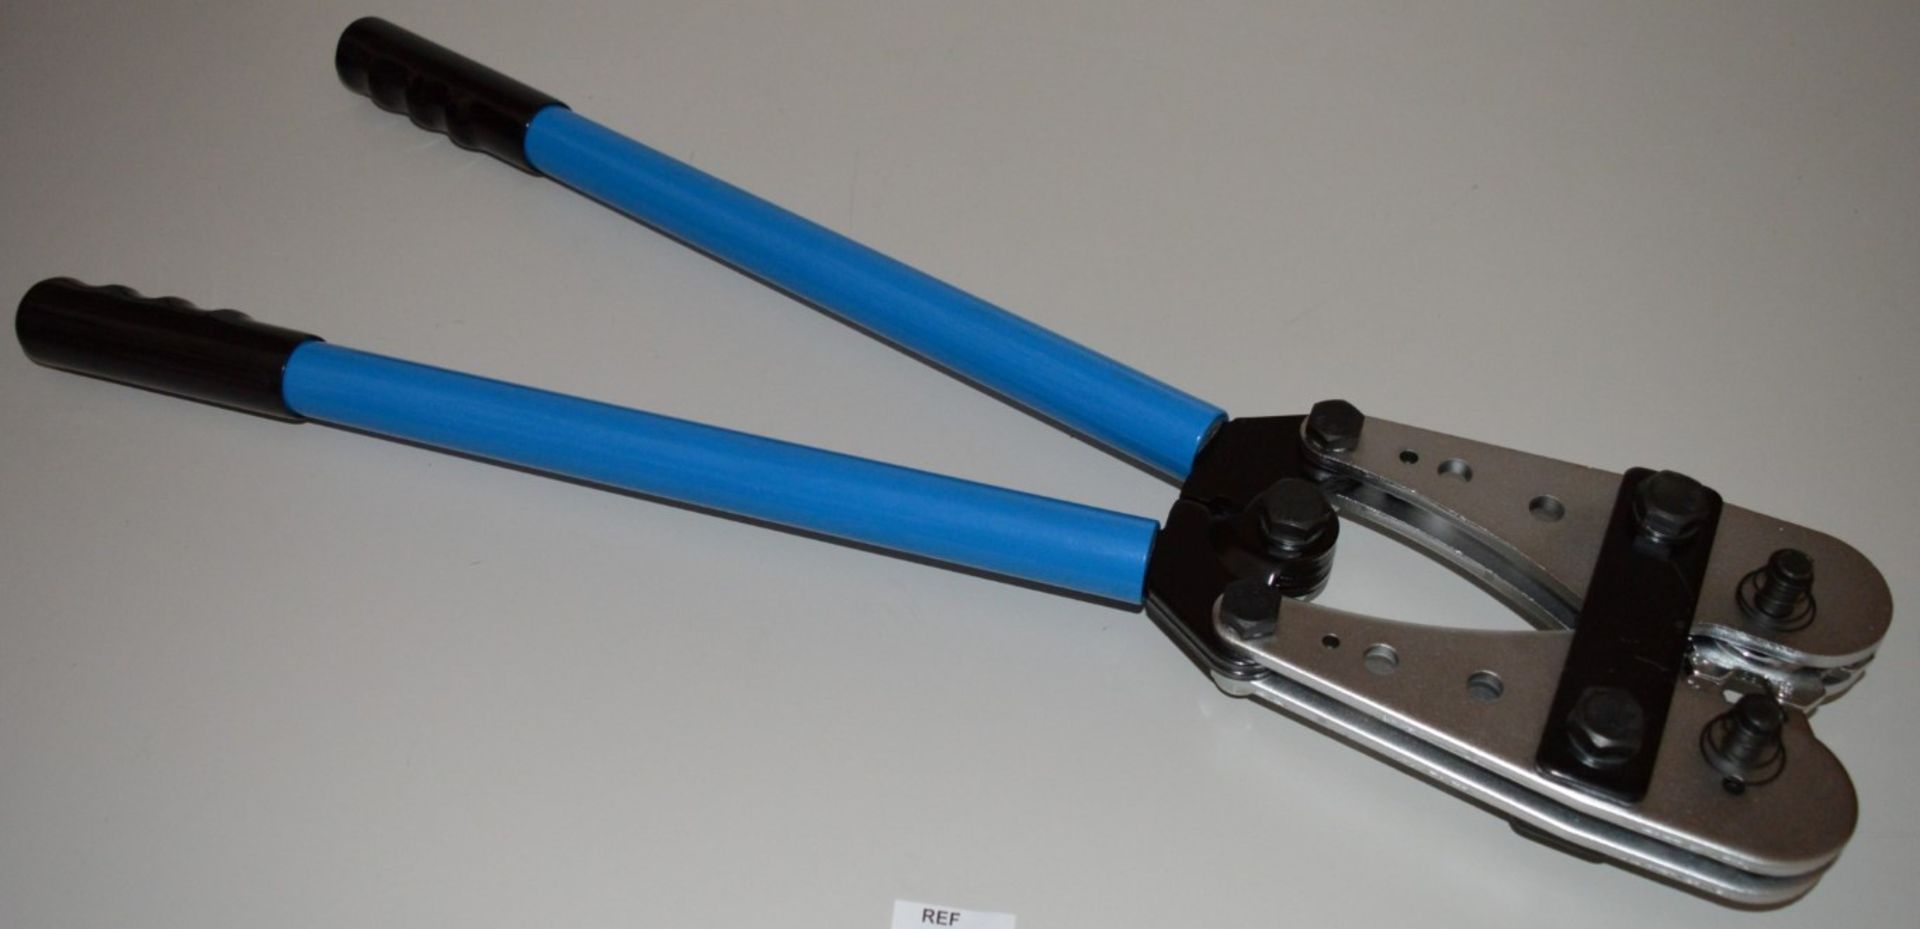 1 x HD Copper Tube Terminal Crimp Tool With Adjustable Hex - 62cm Length - XXX Branded - New and - Image 2 of 4